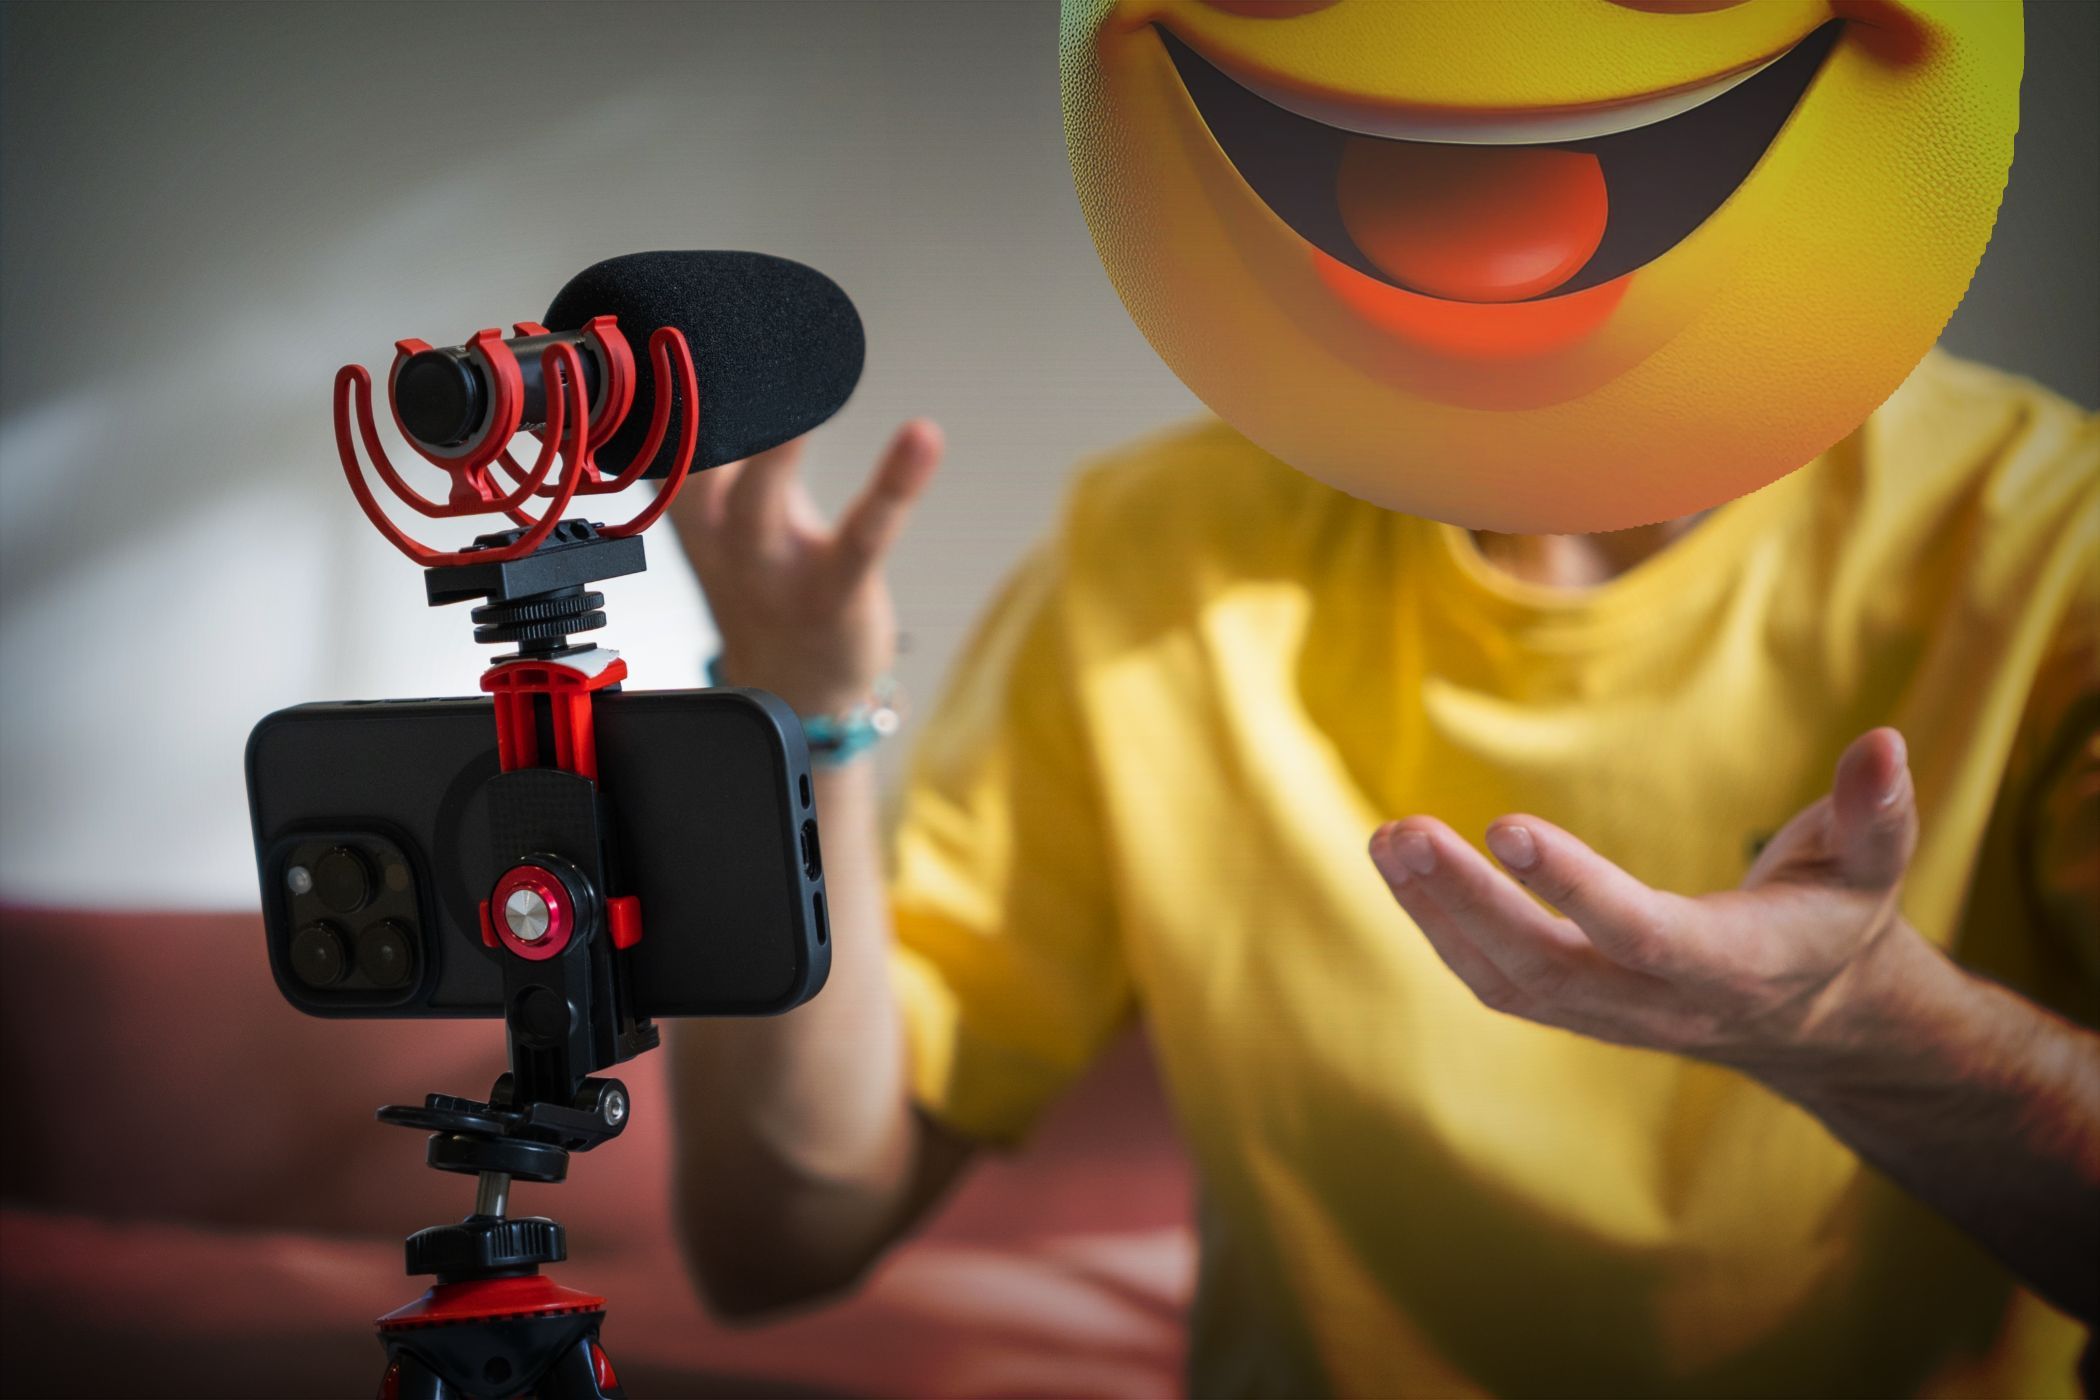 A person with a smiley face emoji head recording a video using a smartphone and microphone setup.